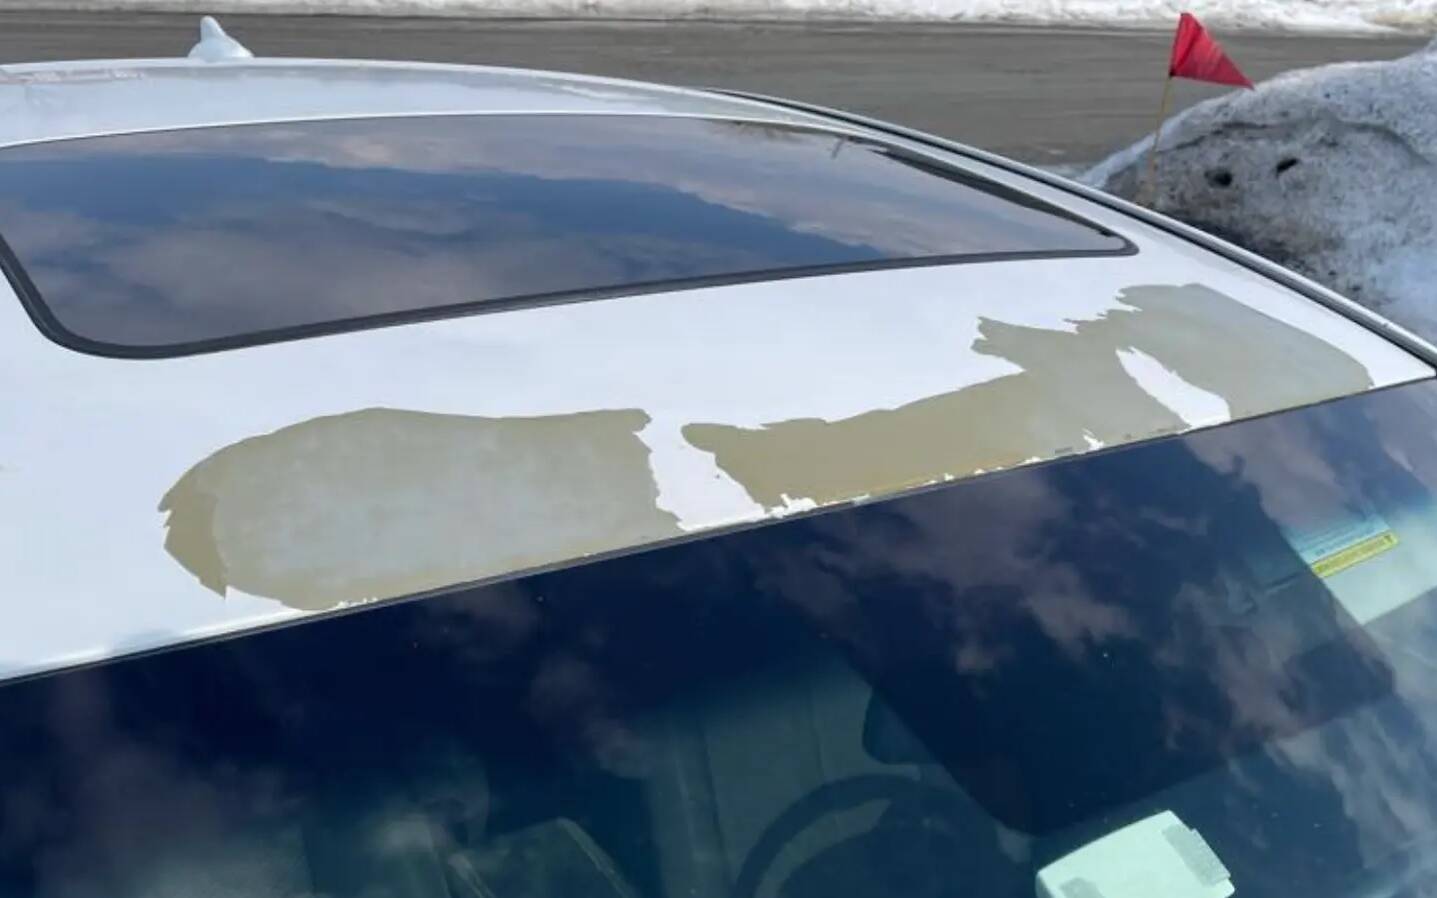 Class Action Filed Against Hyundai Over Peeling Paint 2/2